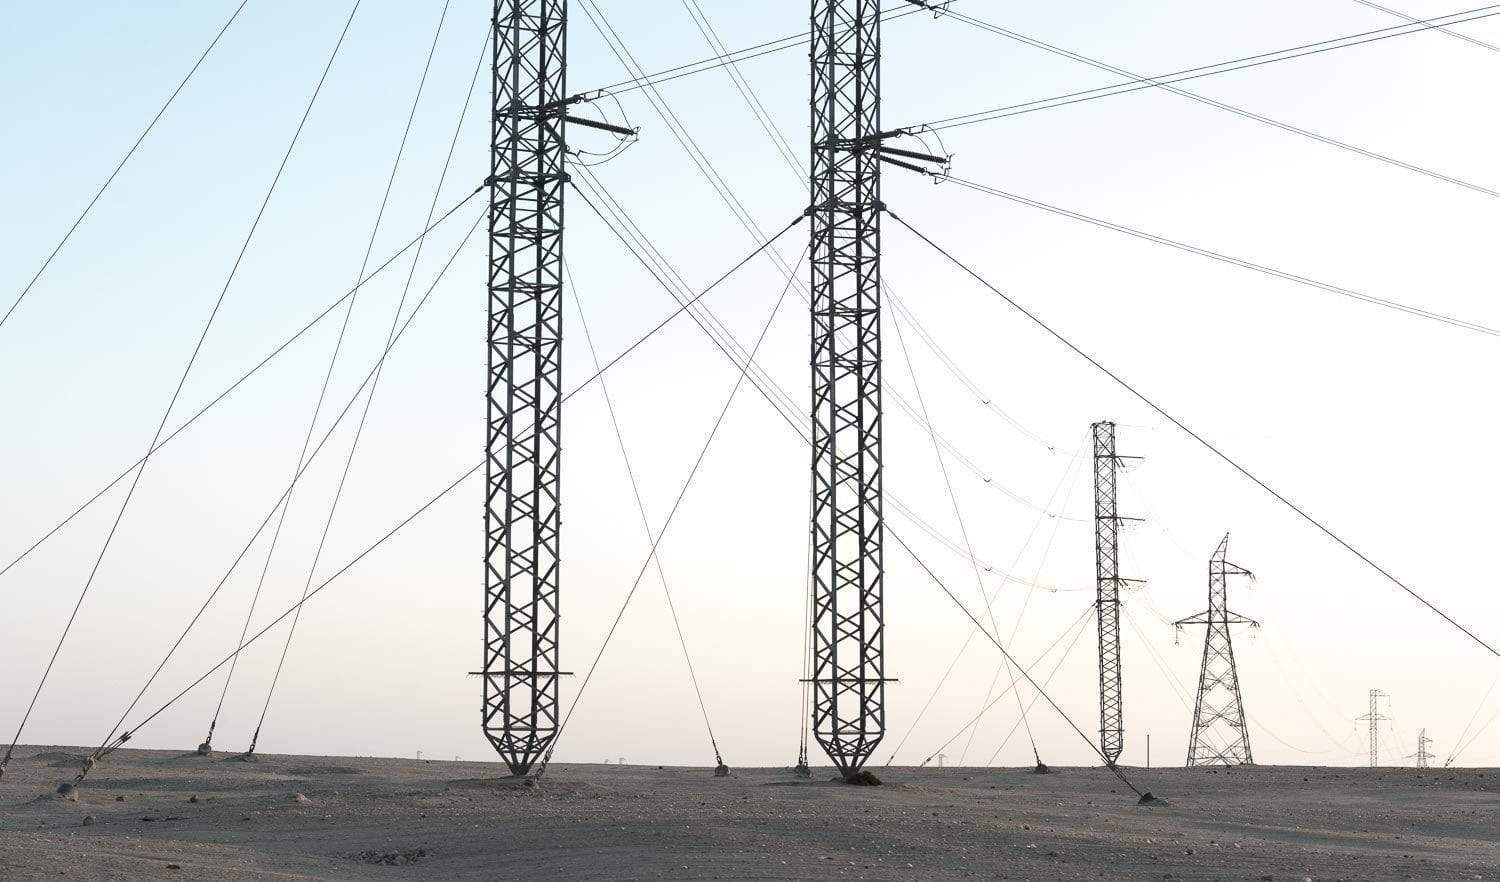 Electric poles with many wires connected, Namibia #2